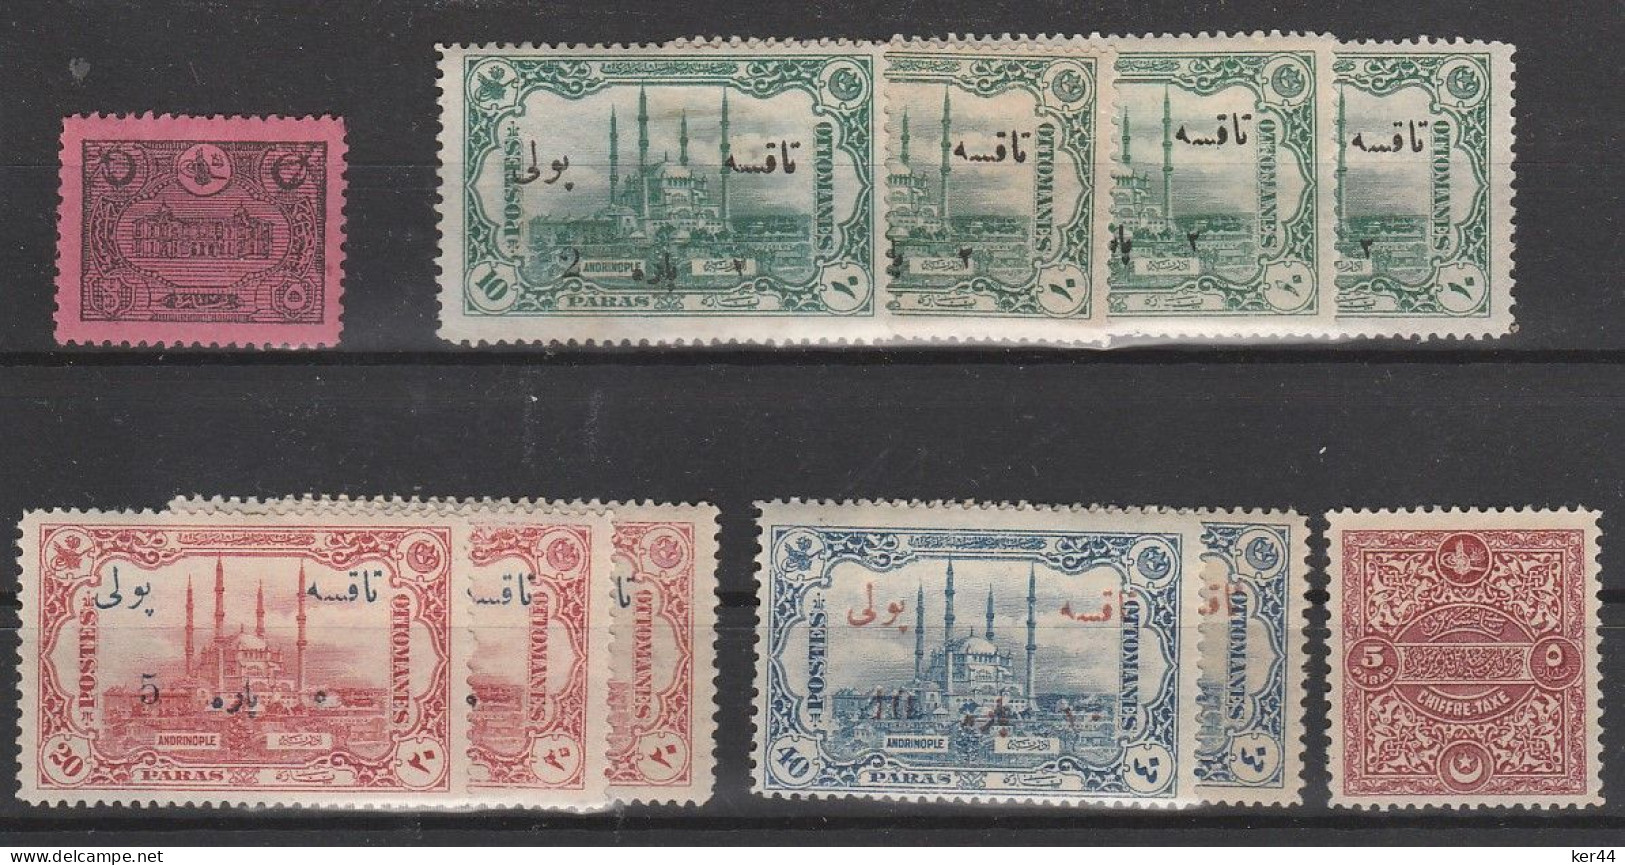 Taxe_Lot De 11 Timbres */NSG -  Revenue Stamps Lot_MH/MNG - Postage Due